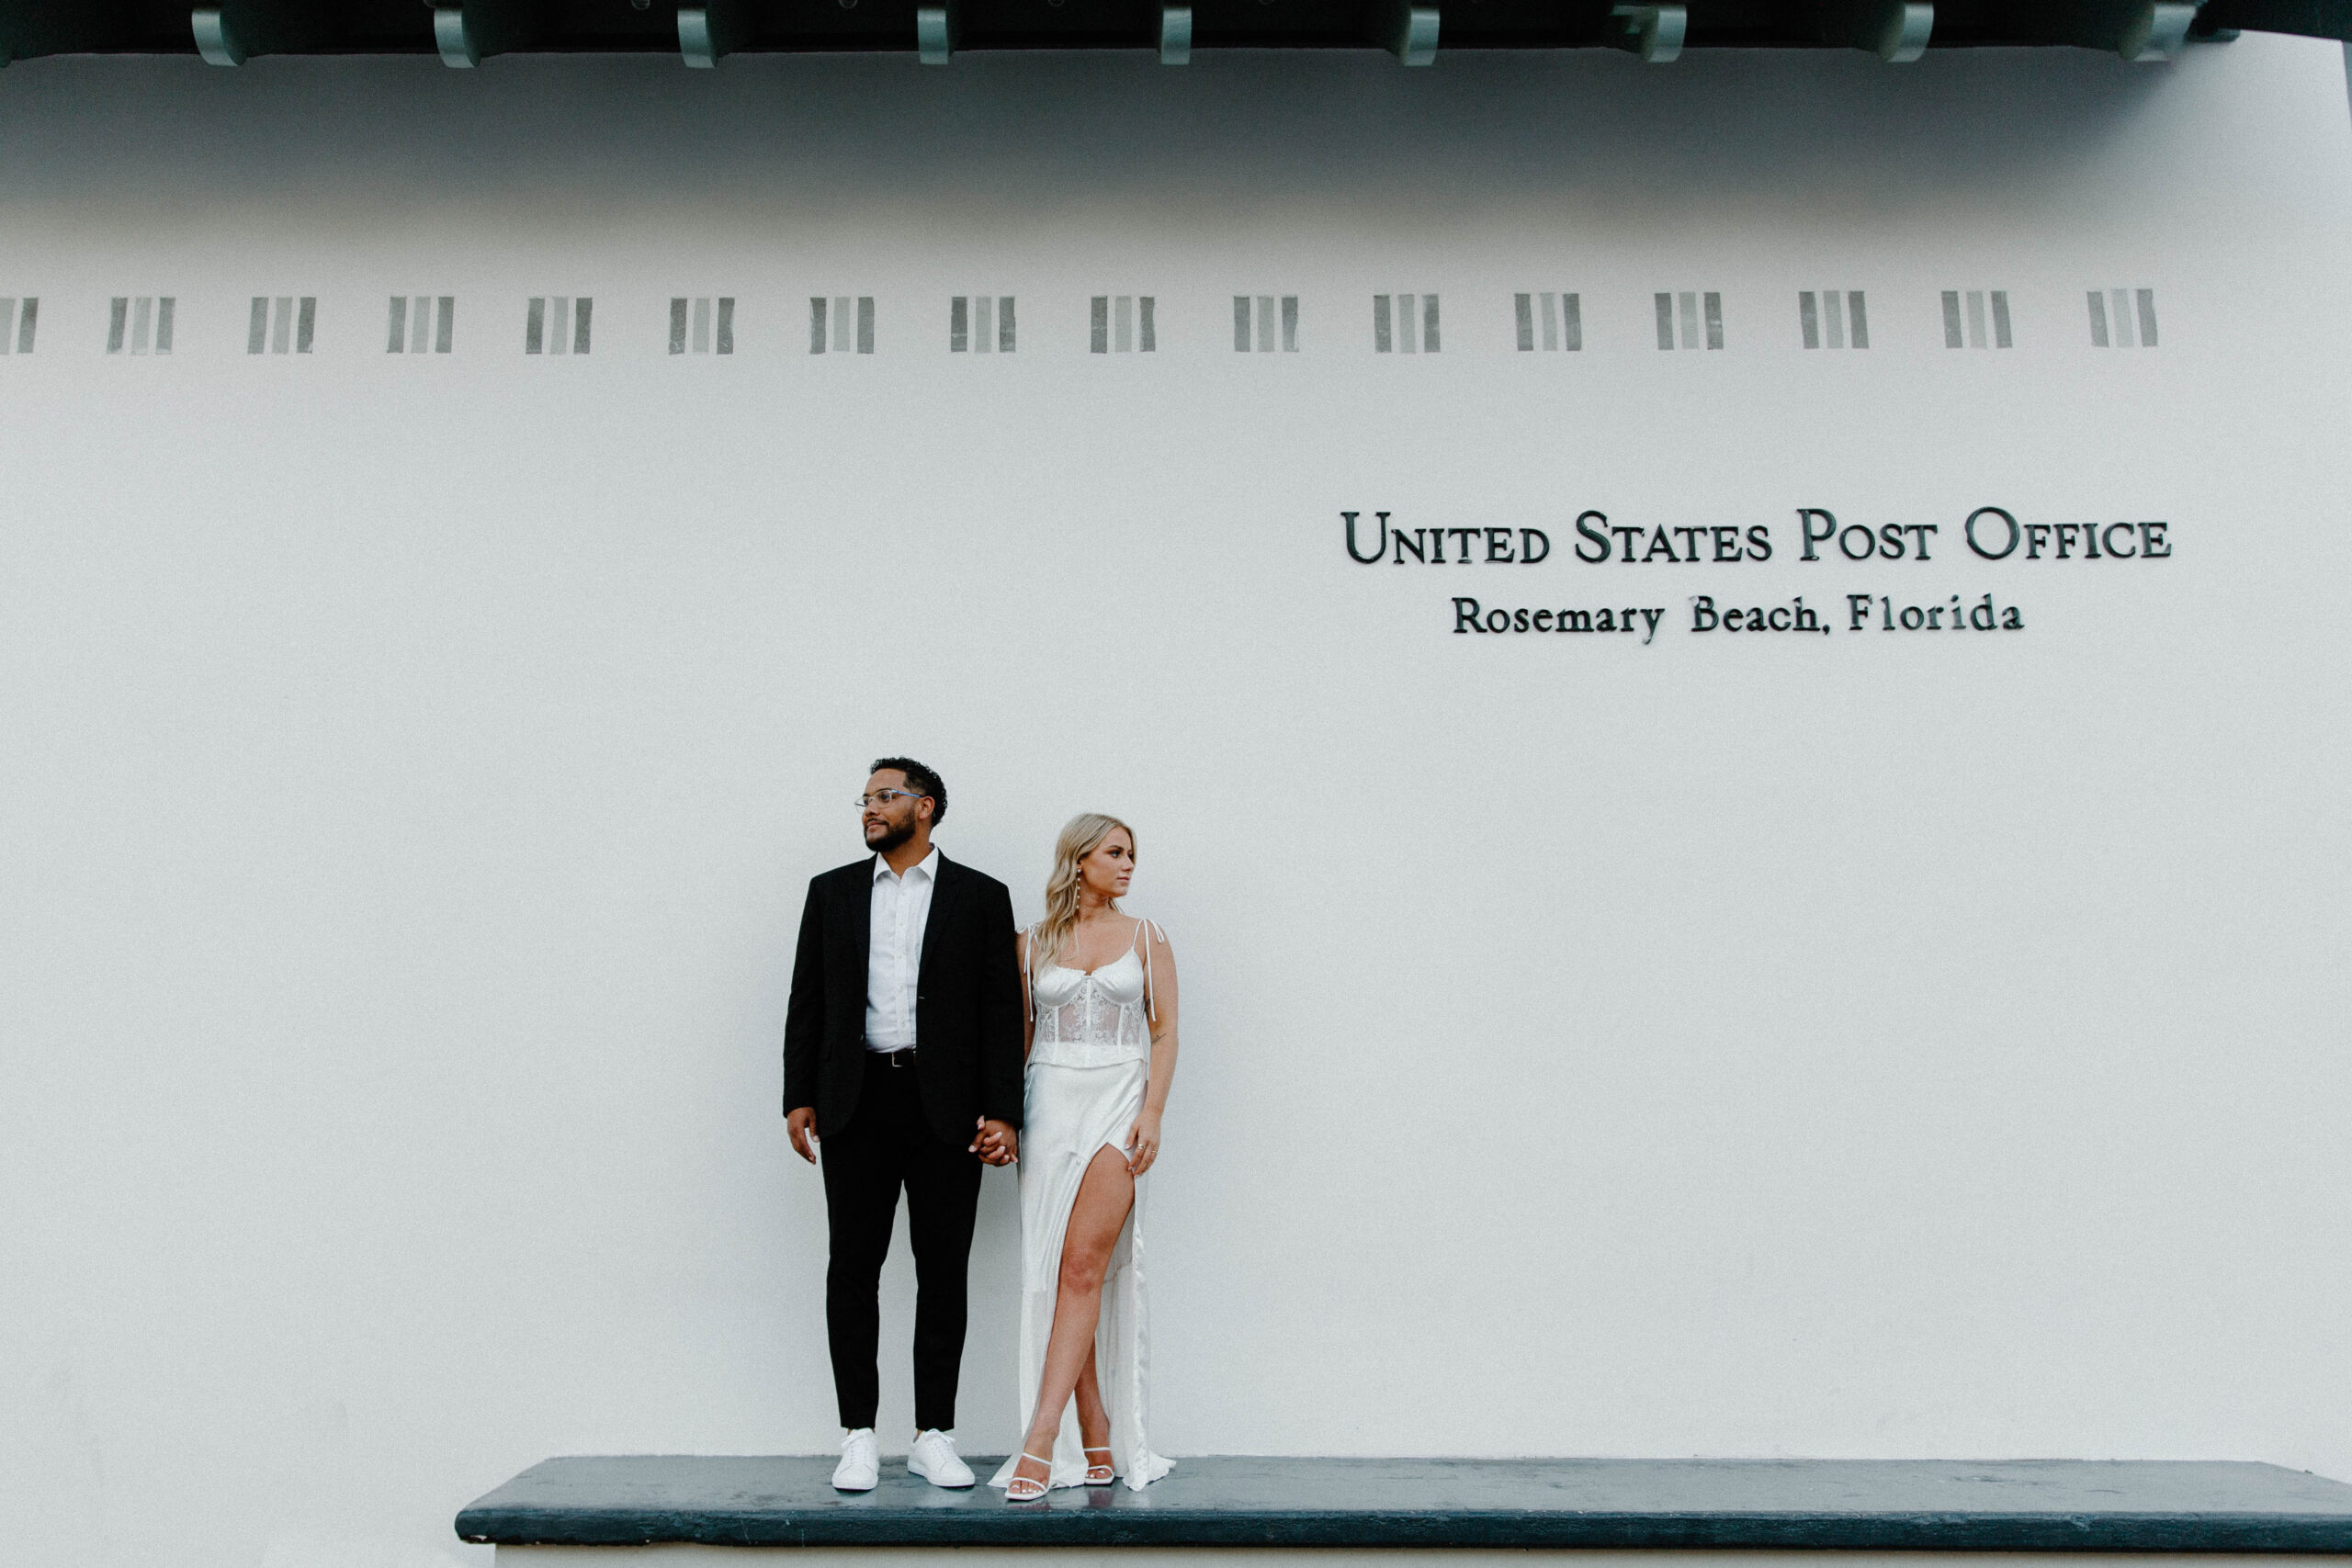 A newly engaged couple standing on the Rosemary Beach post office ledge holding hands and looking opposite directions of each other with a man in a black suit and the woman in a white dress